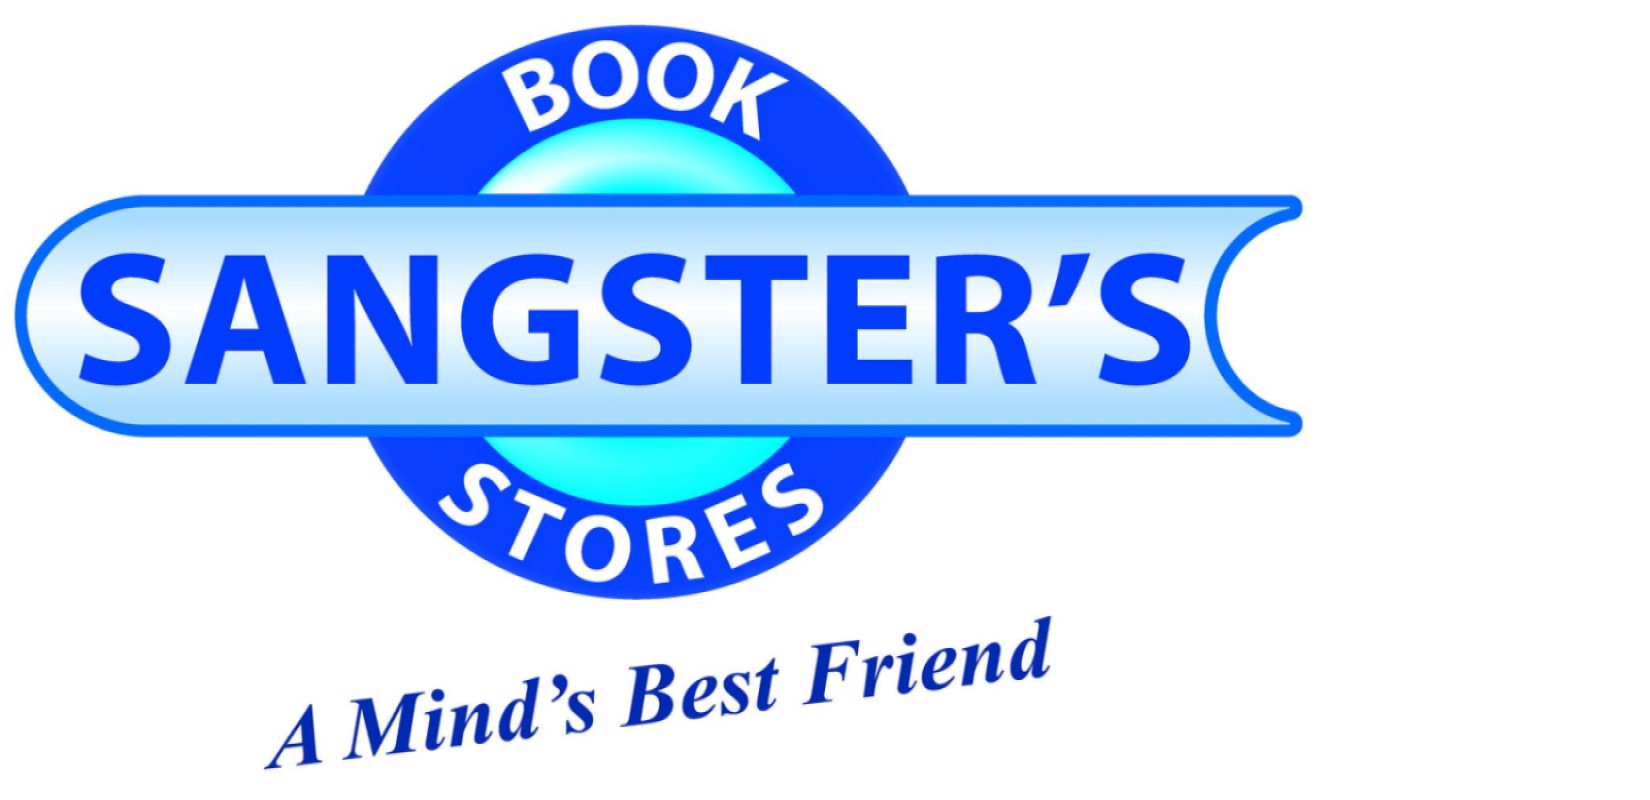 Sangster's Book Stores Ltd - Office Furniture & Equipment